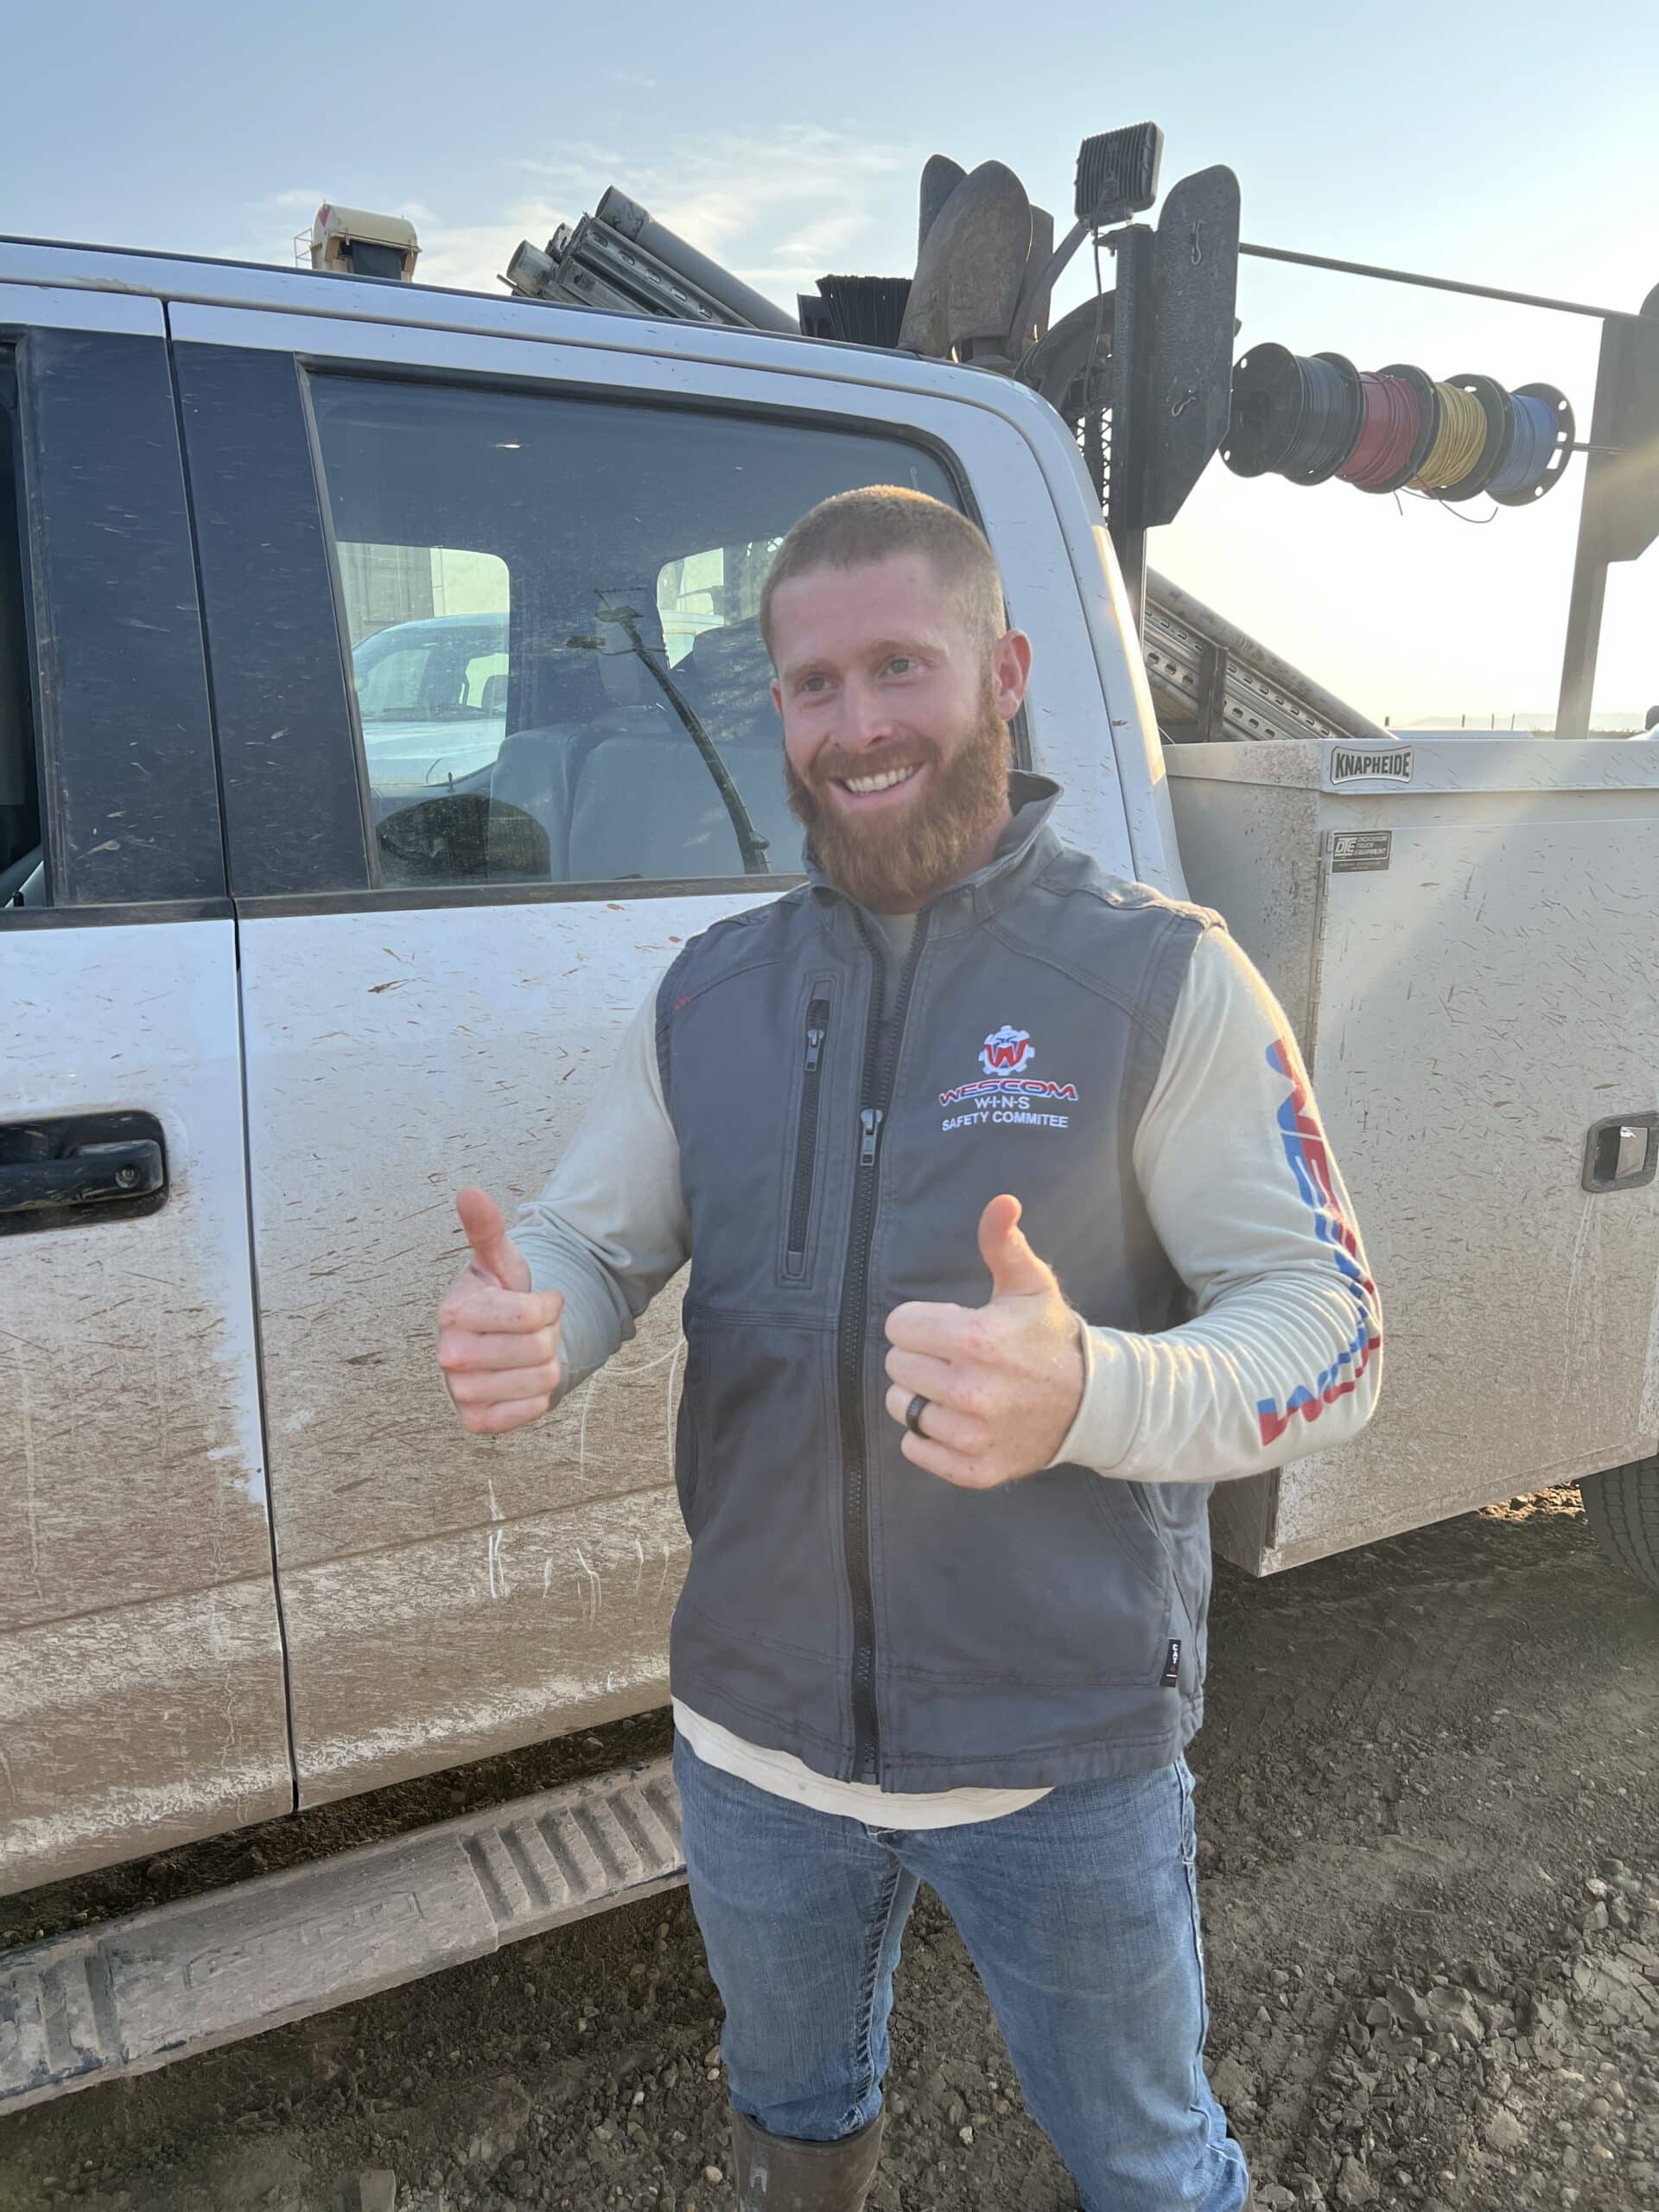 Man smiling with two thumbs up wearing a wescom vest